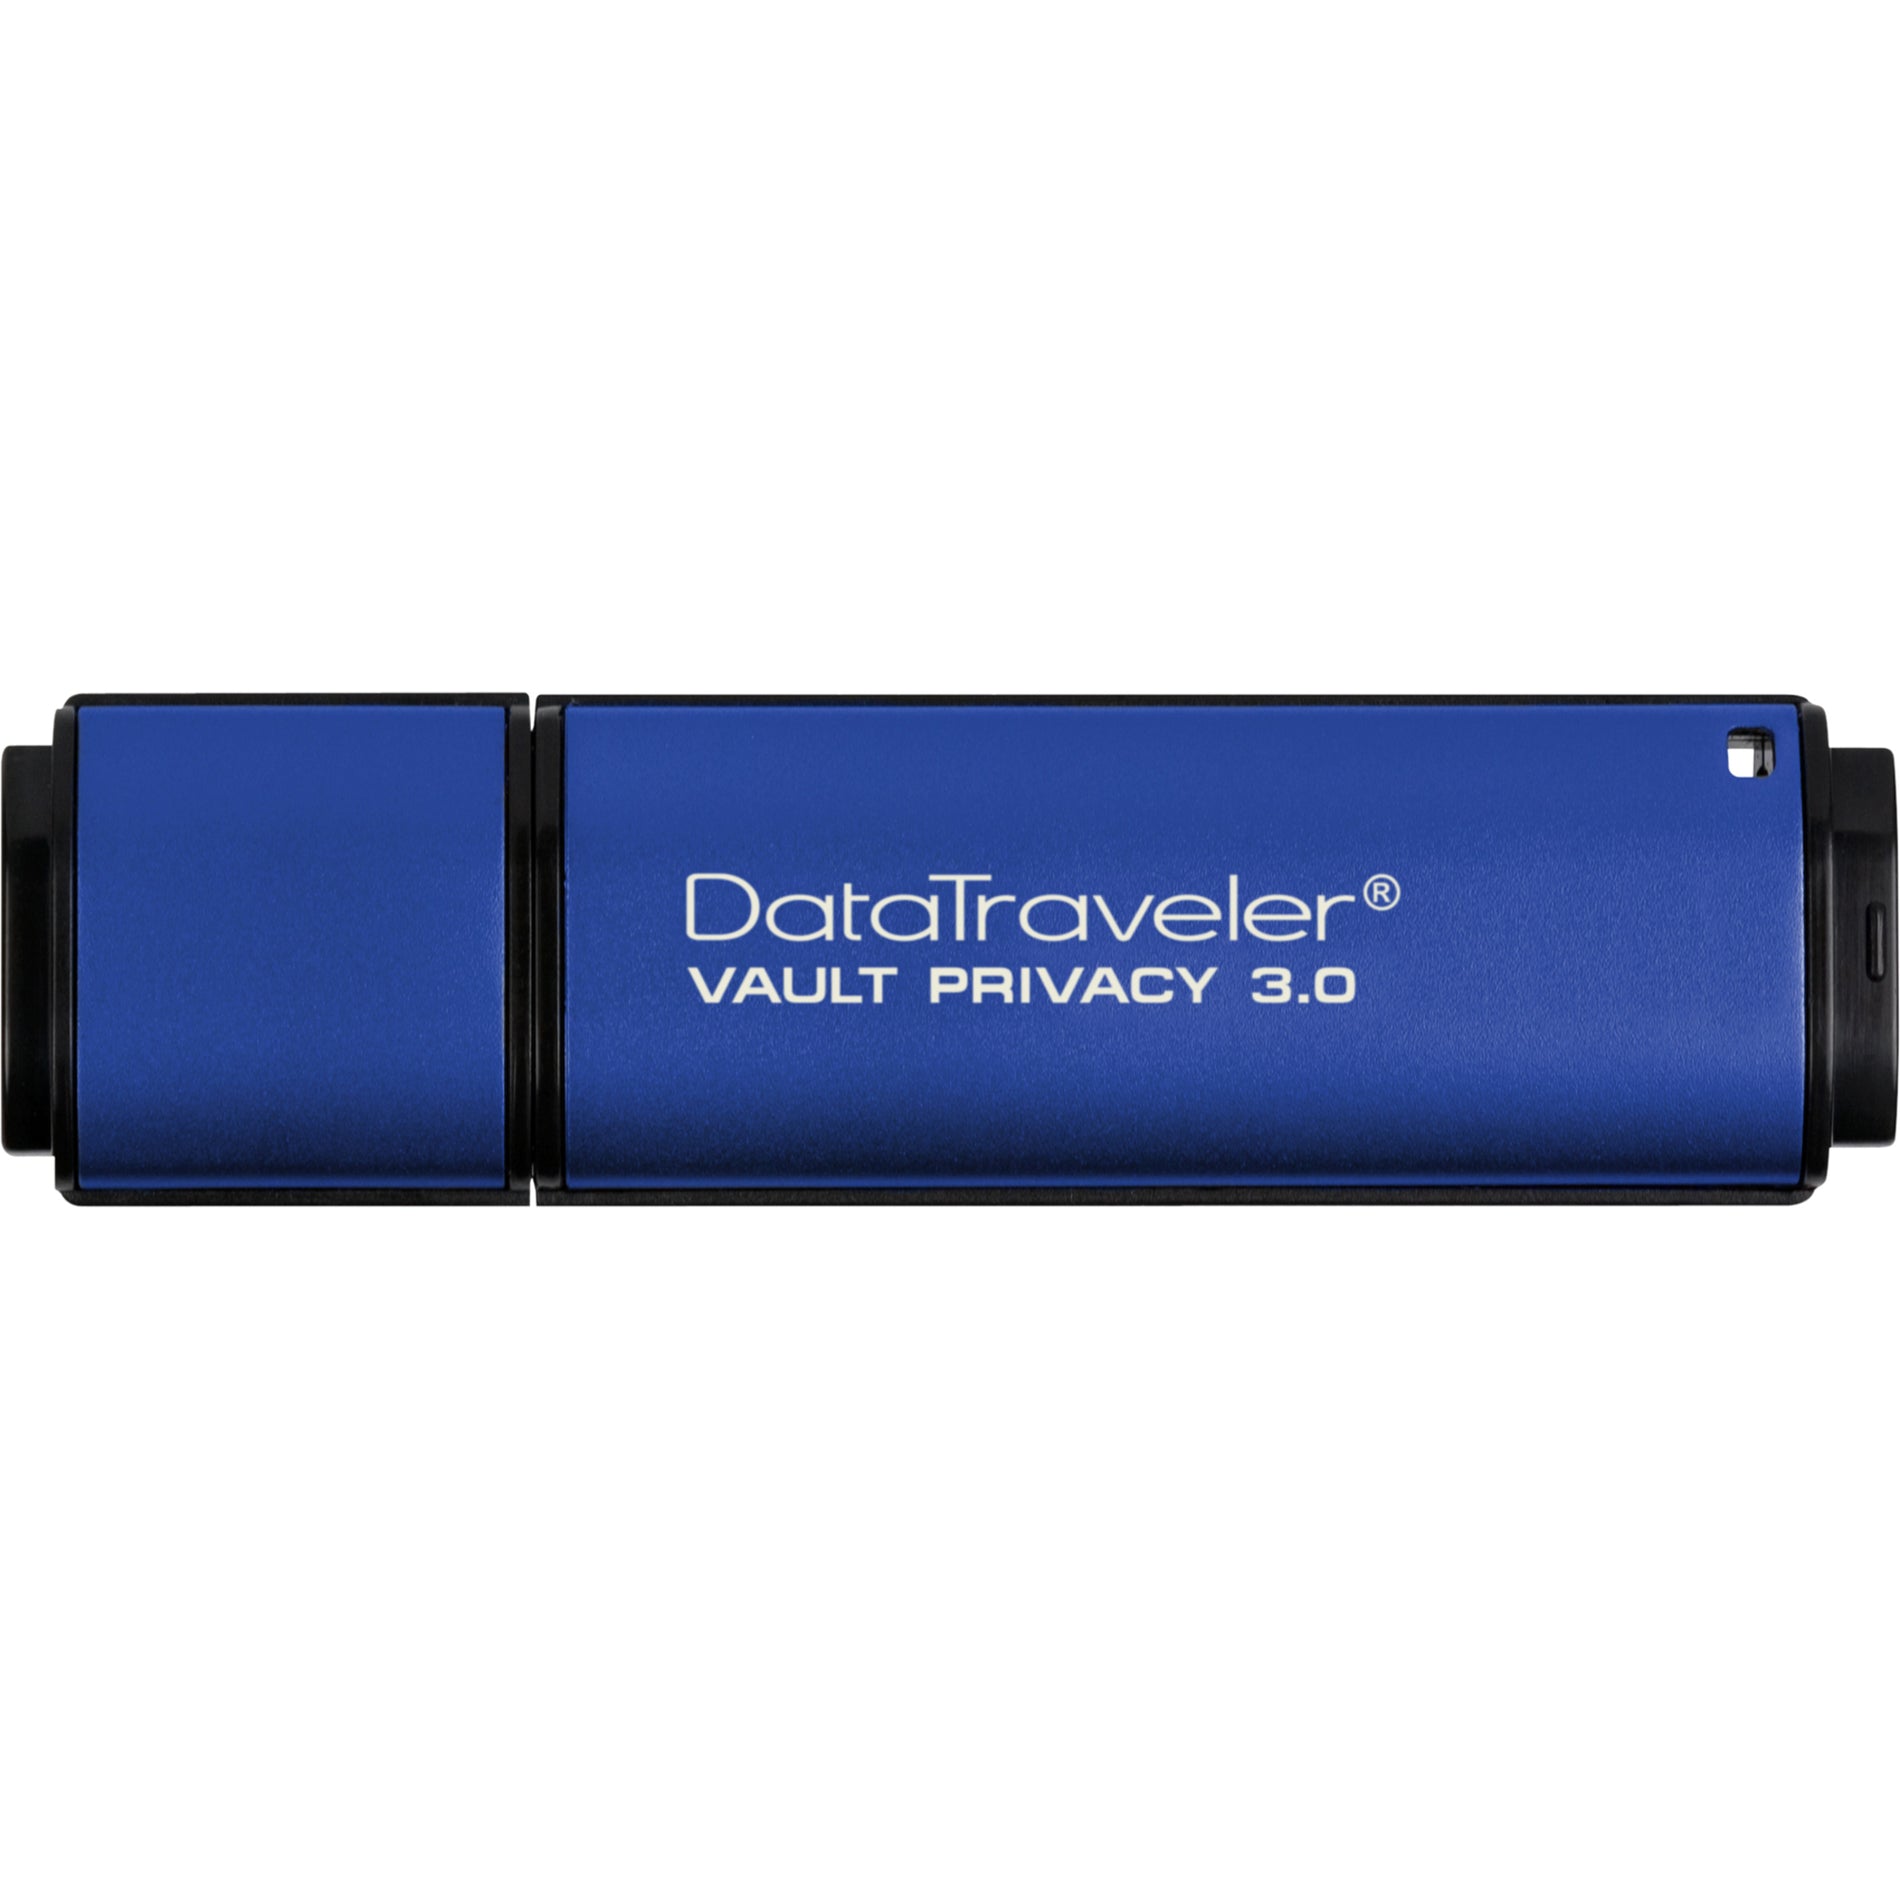 Kingston DTVP30/64GB DataTraveler Vault Privacy 3.0 Flash Drive, 64GB Storage, Water Proof, Encryption Support, Password Protection